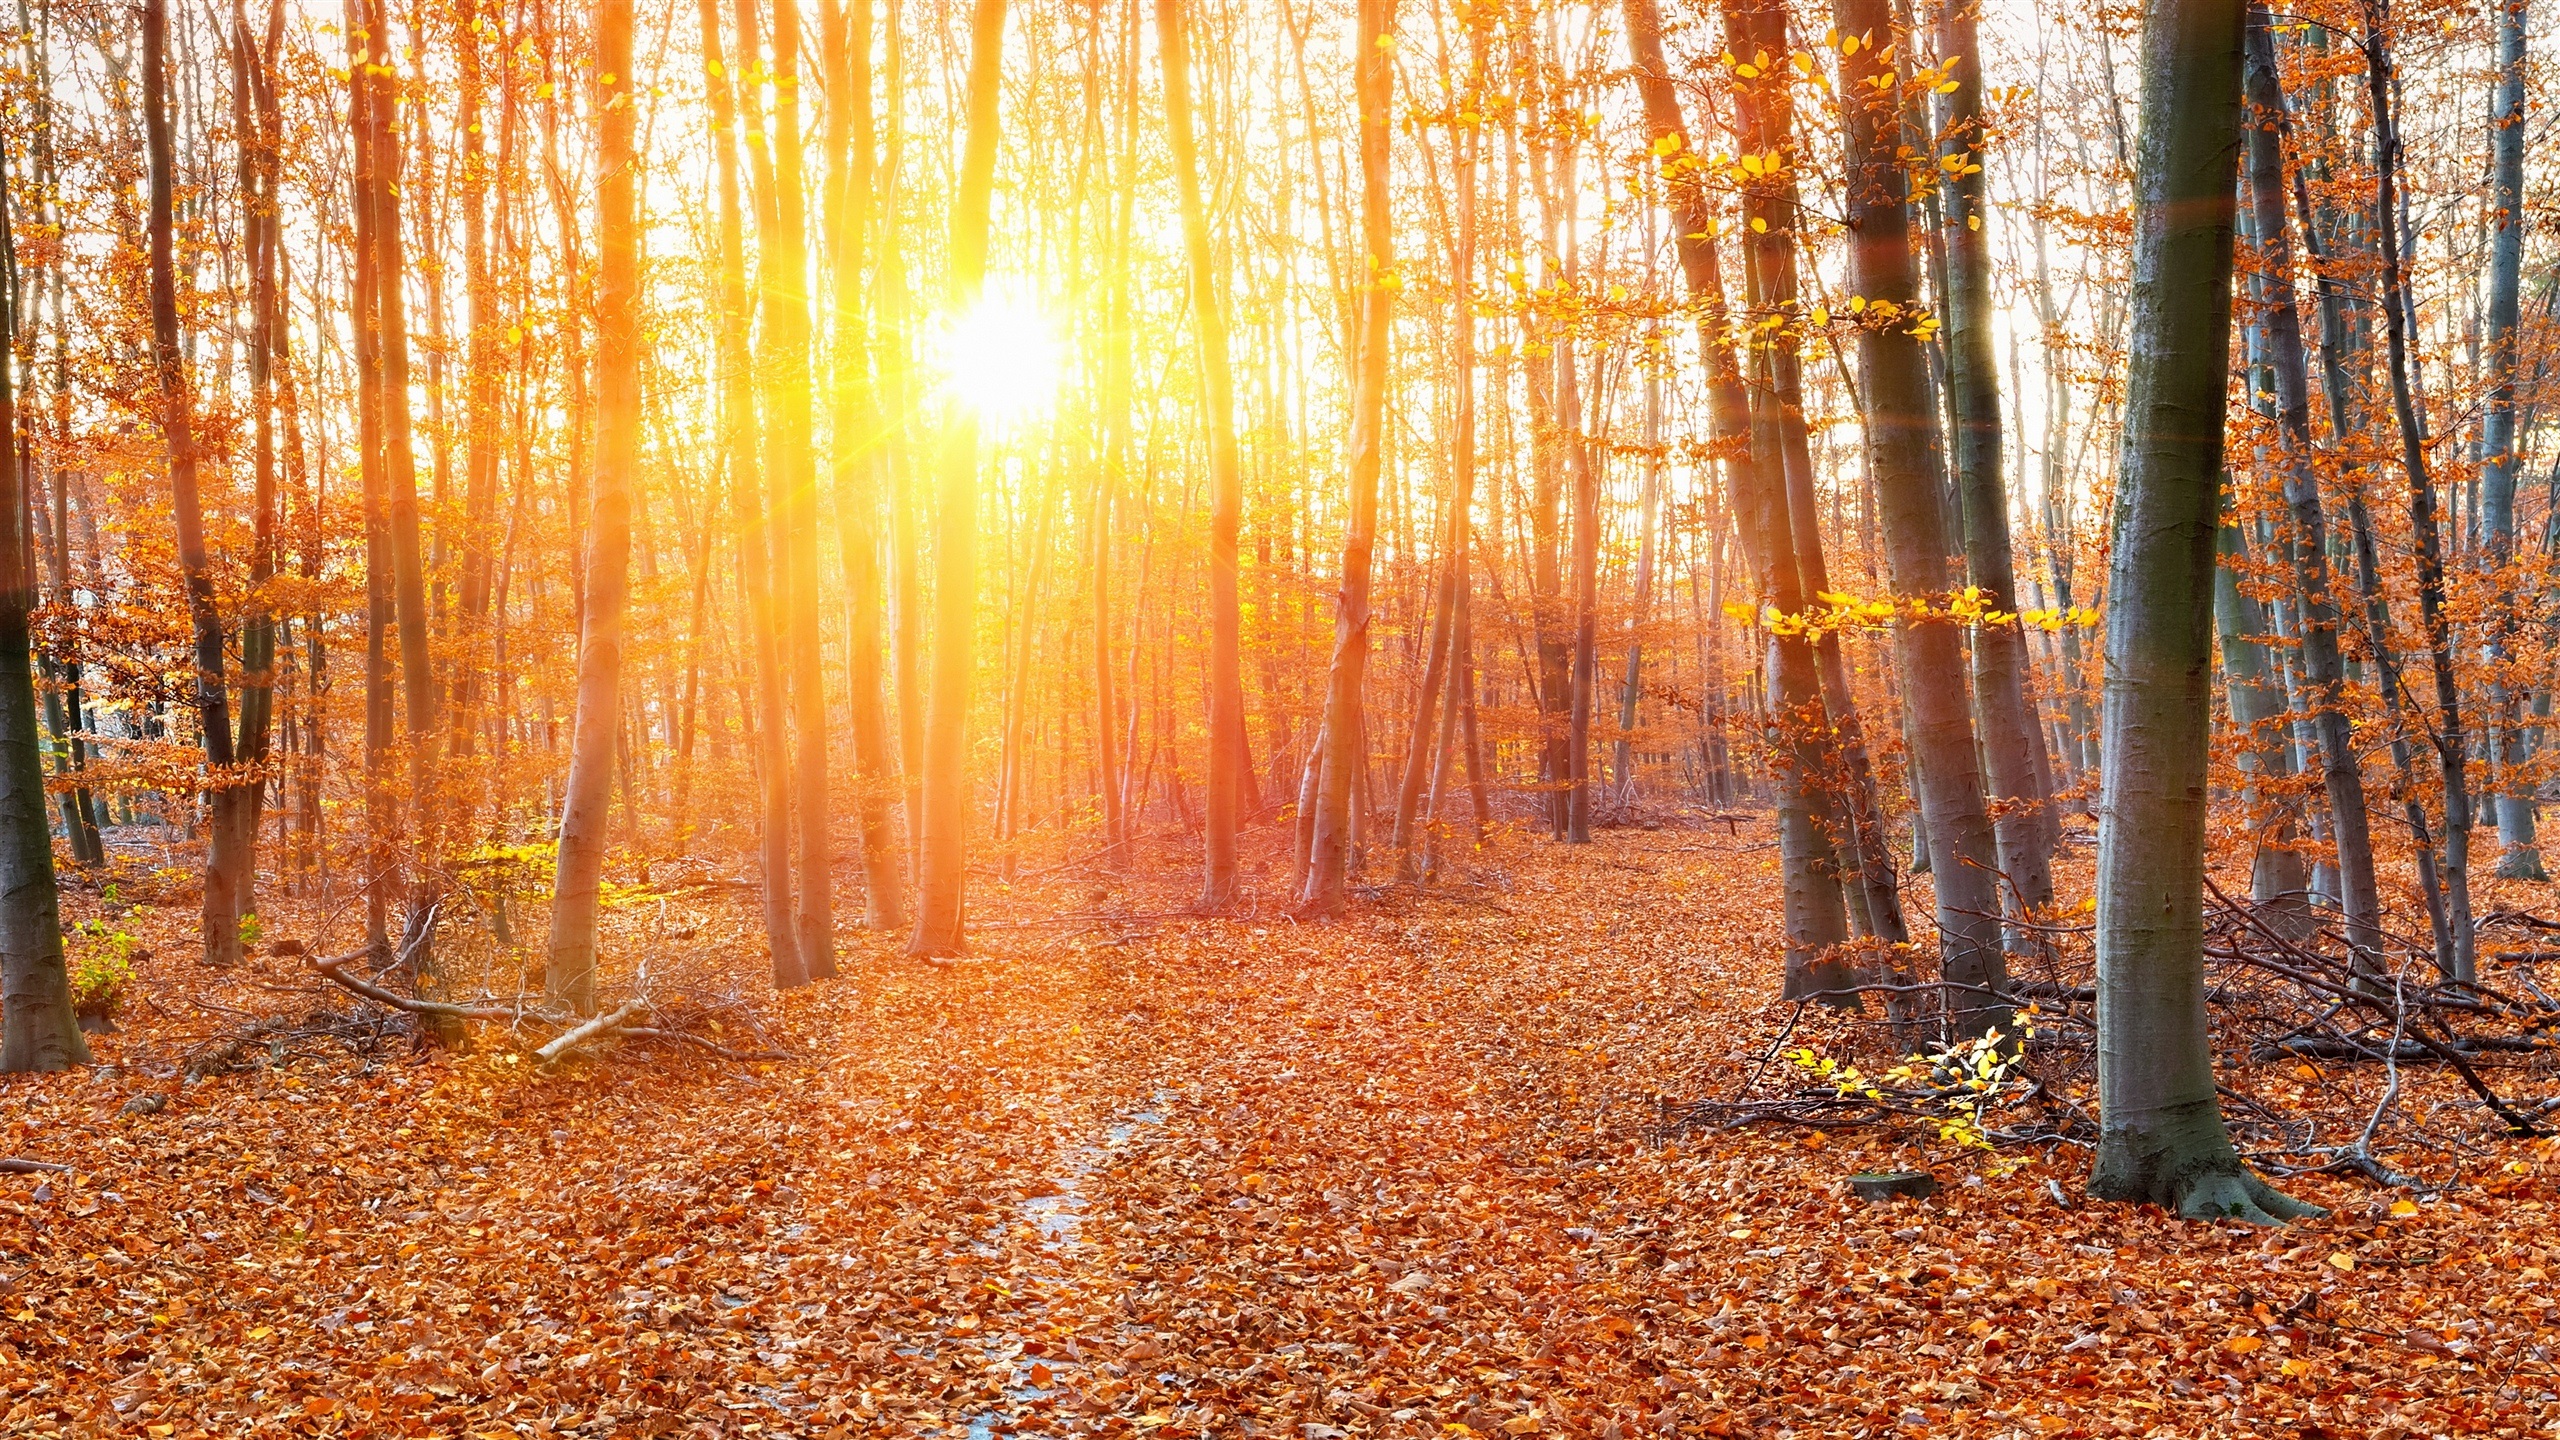 General 2560x1440 forest sunlight Sun fall leaves trees nature